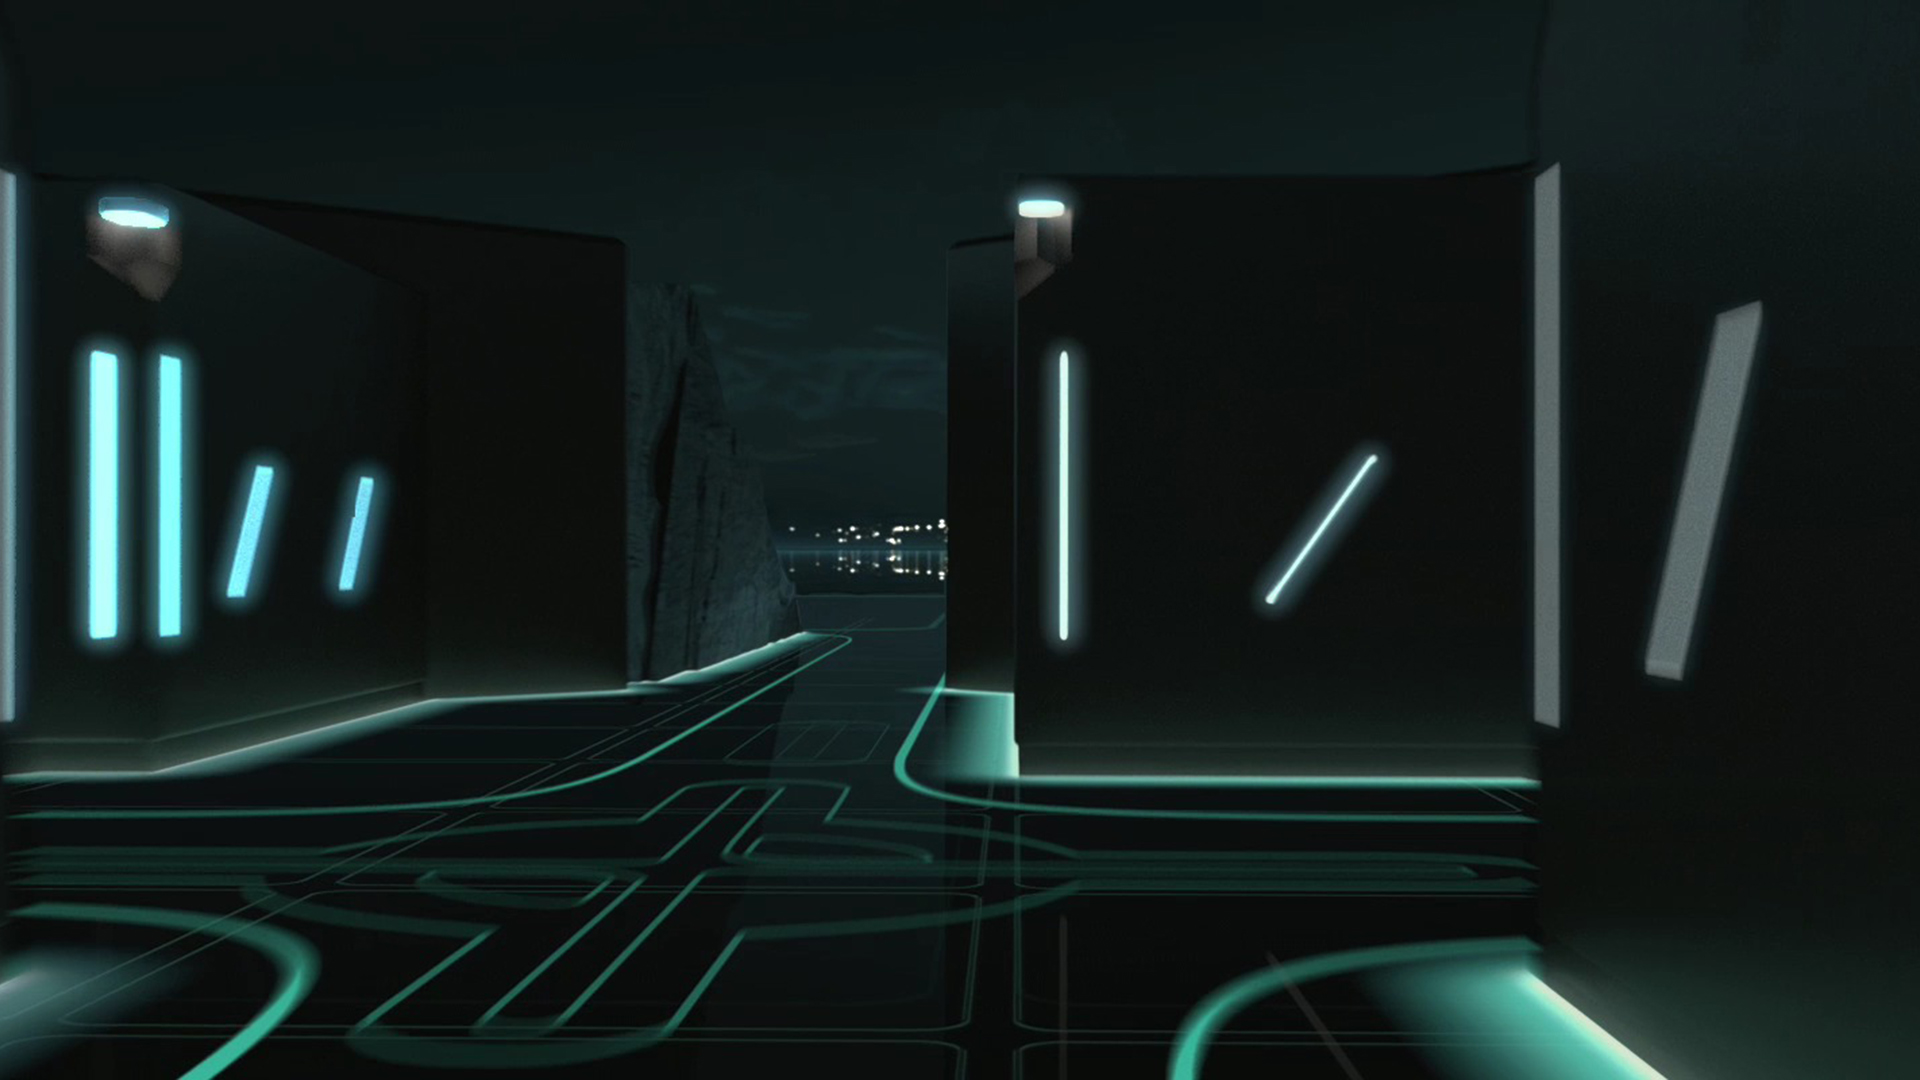 Tron Legacy Free Desktop Wallpapers for HD Widescreen and Mobile